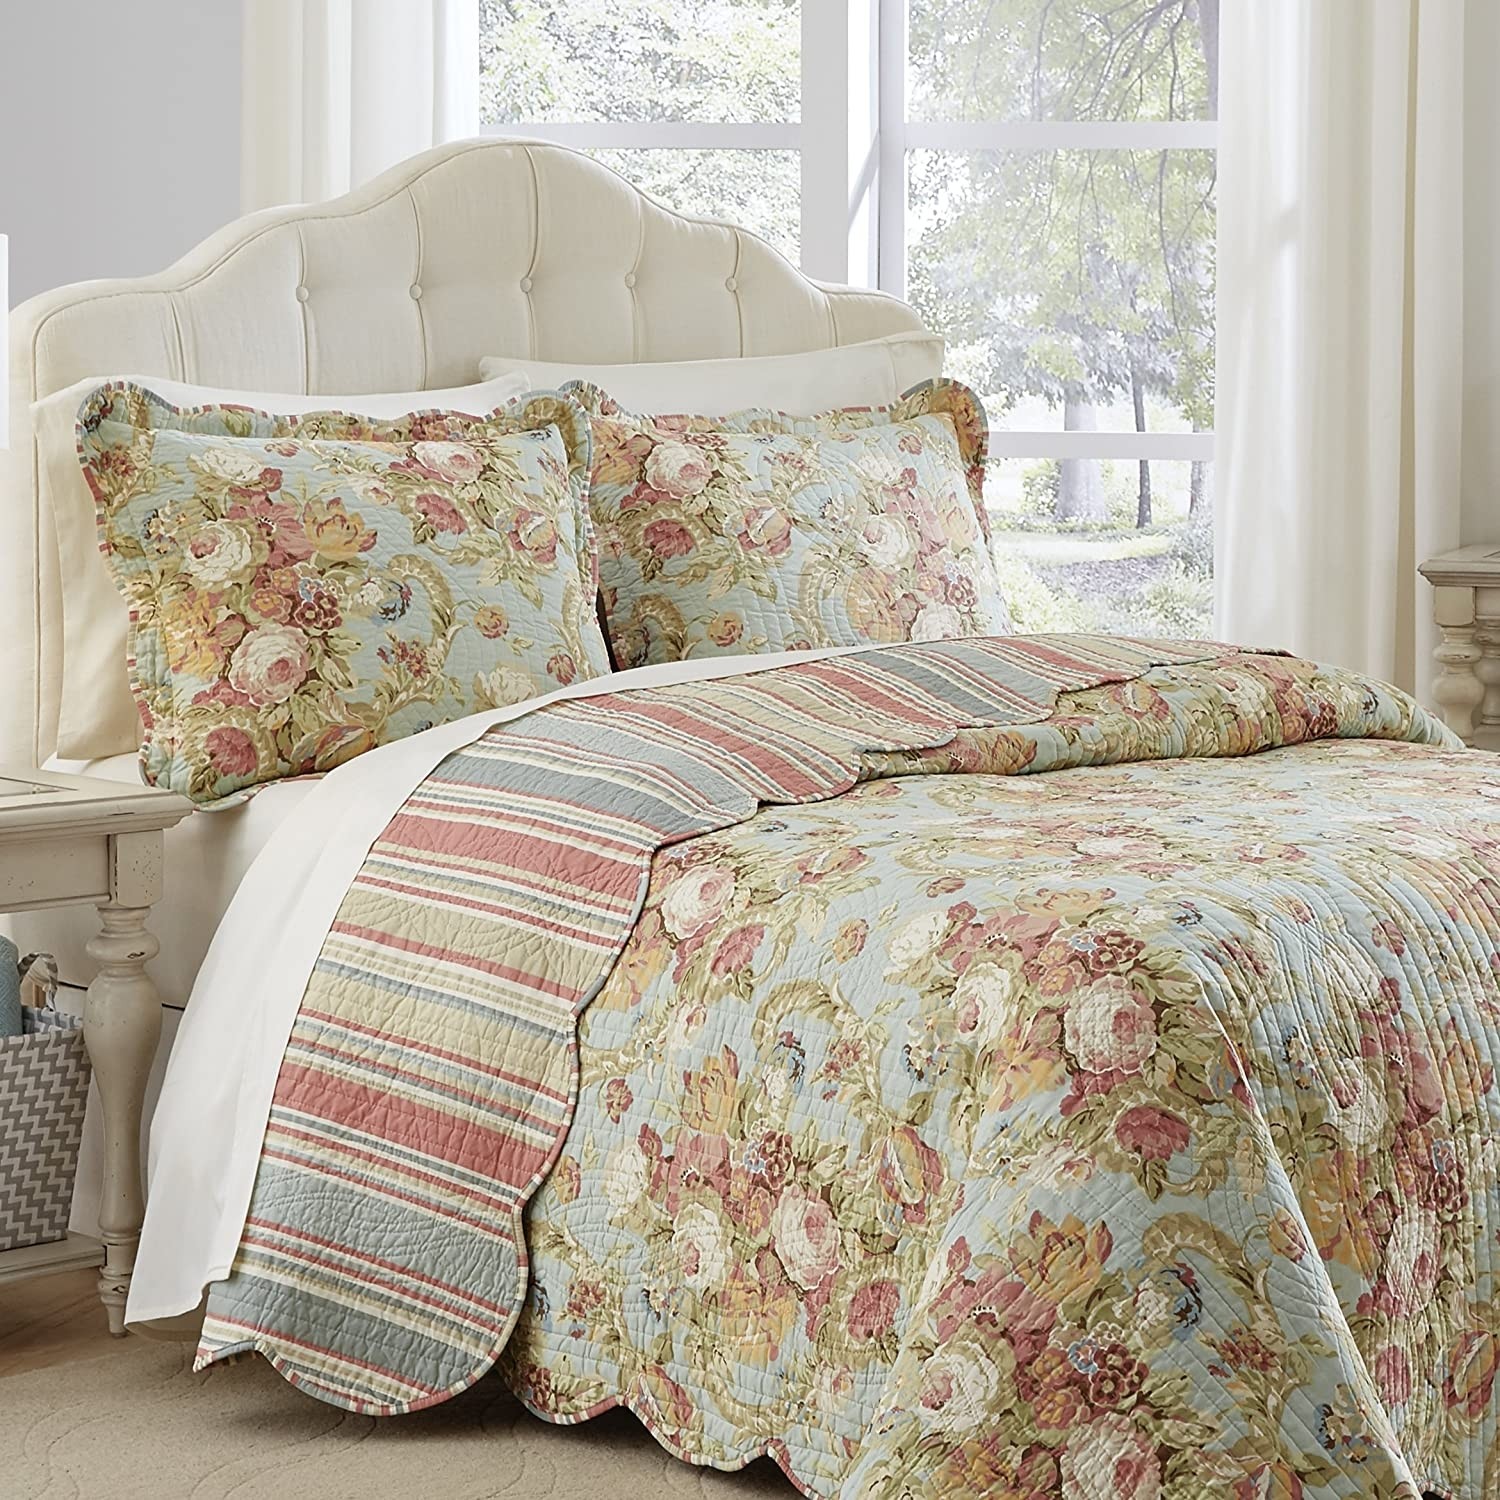 Waverly spring bling bedding set with 2 coordinating shams